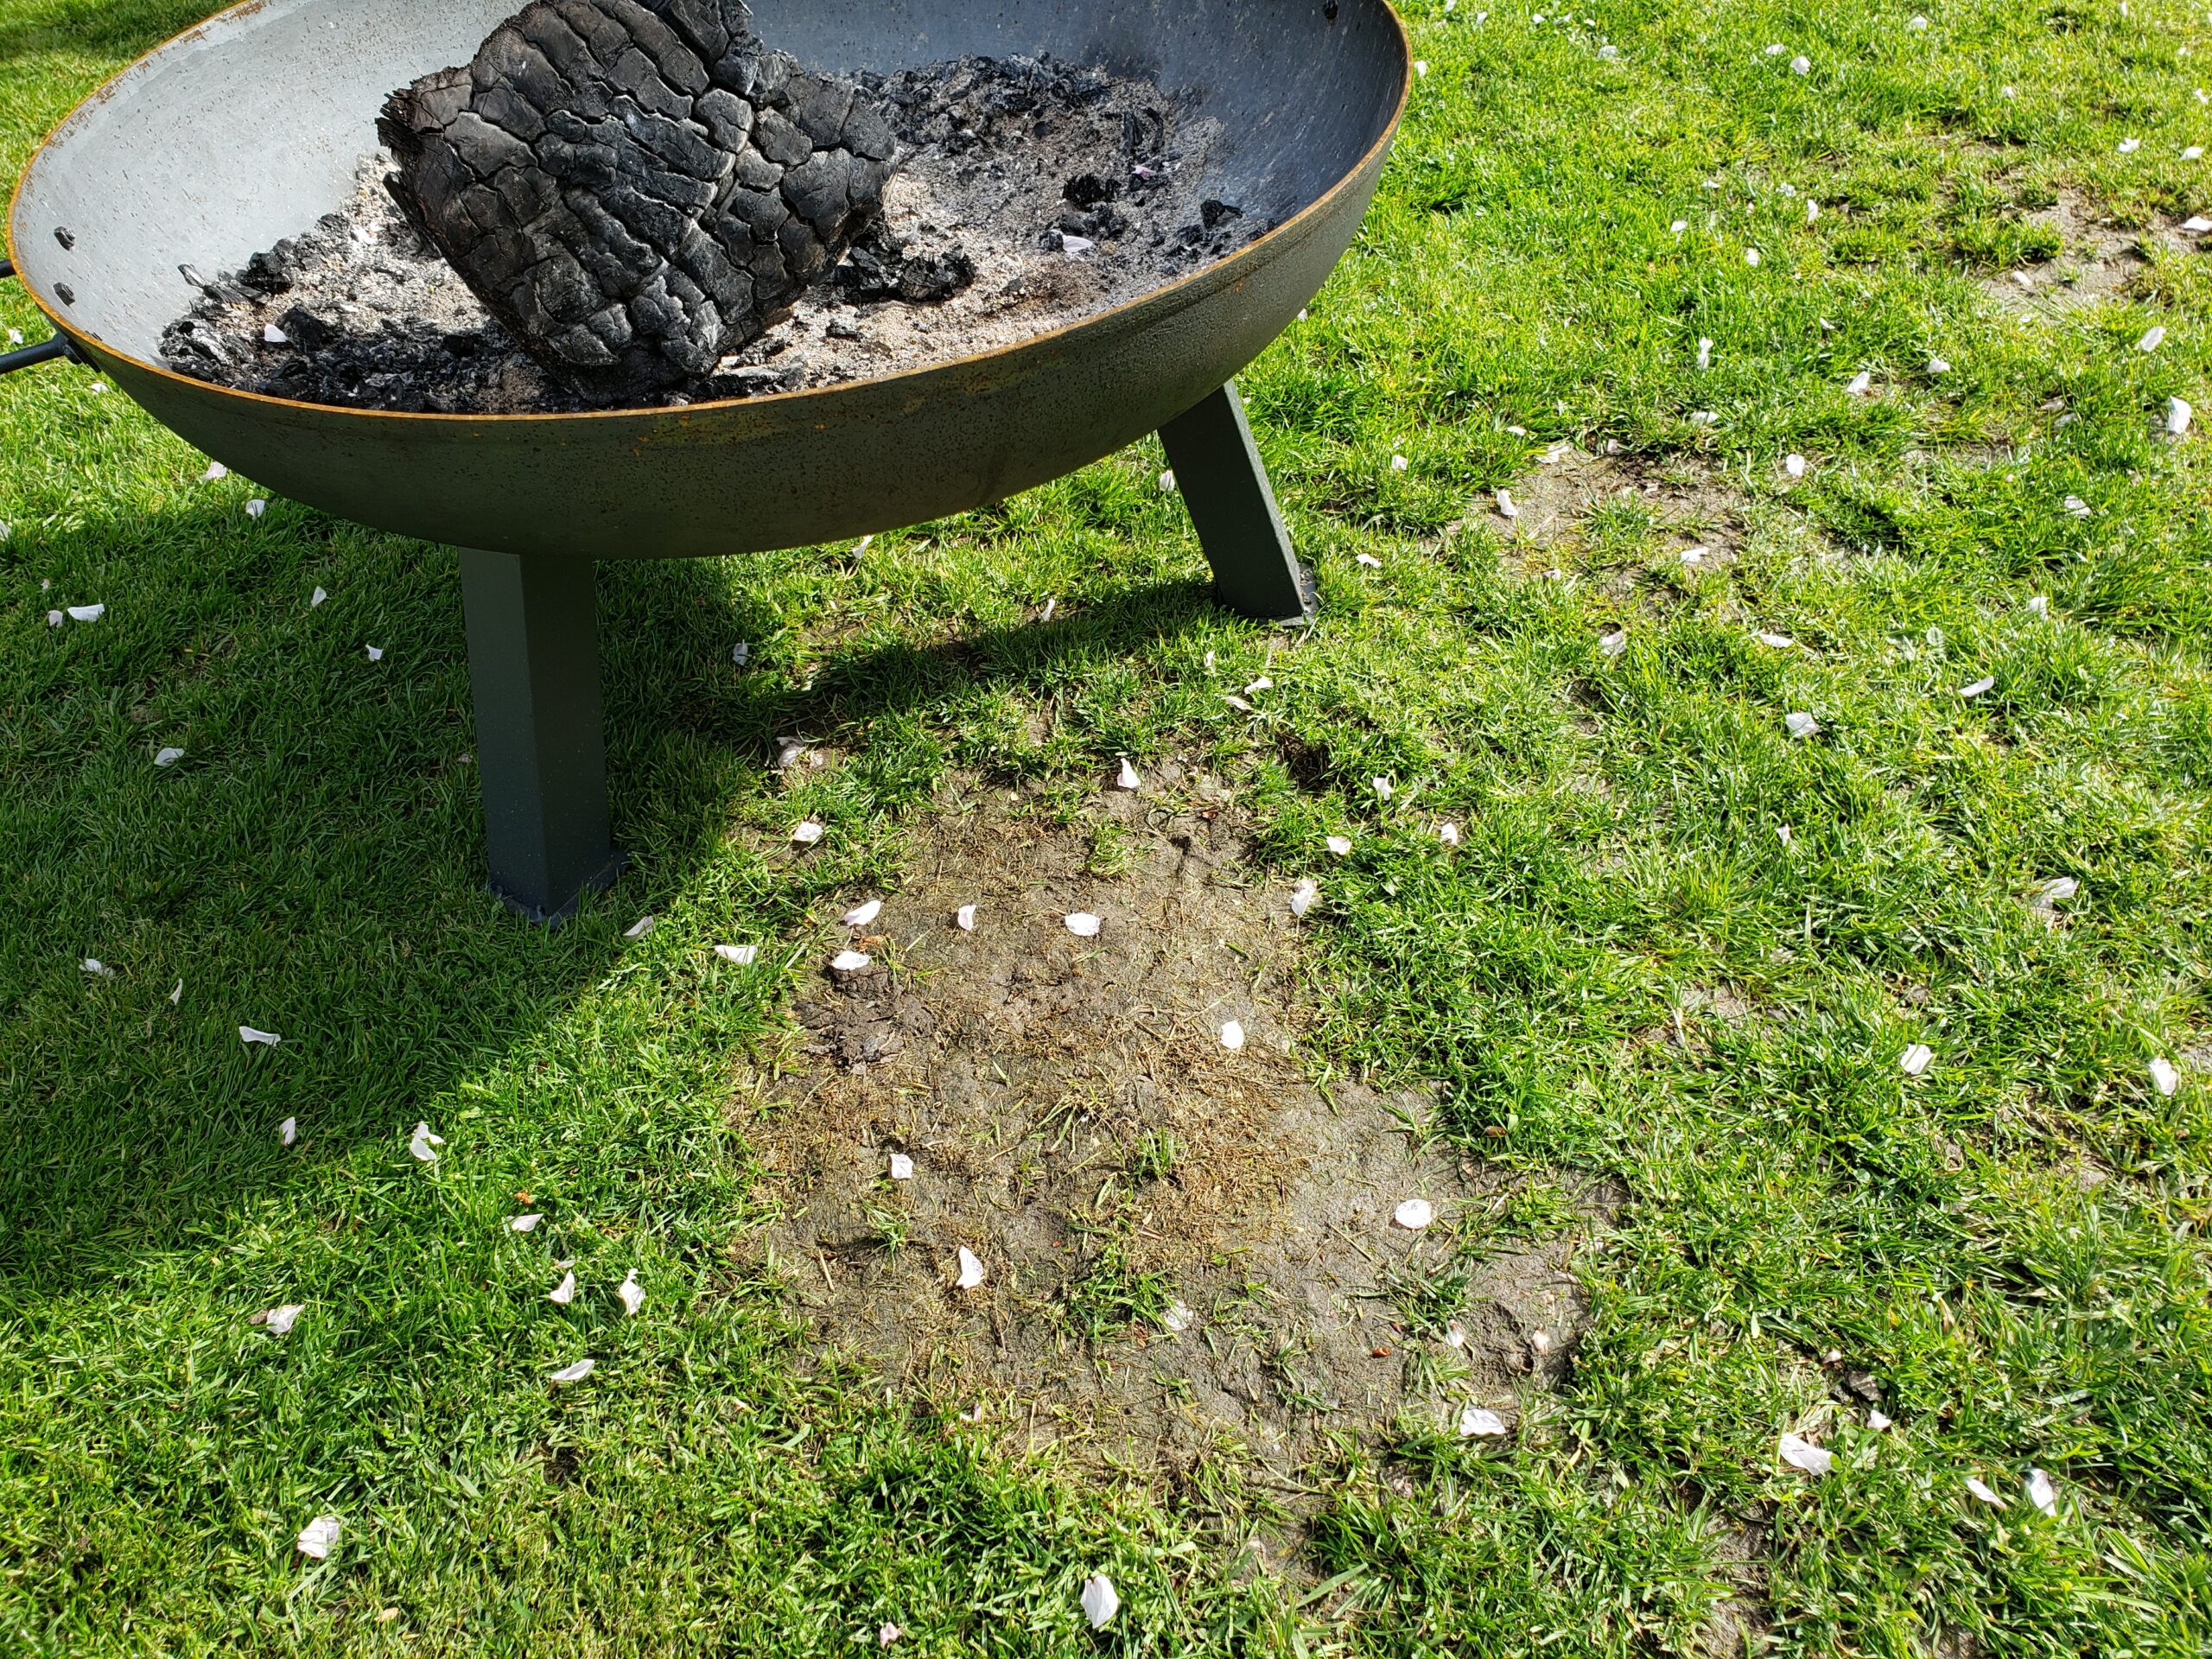 Fire Pit On Grass 5 Best Ways To, Can You Put A Portable Fire Pit On Grass